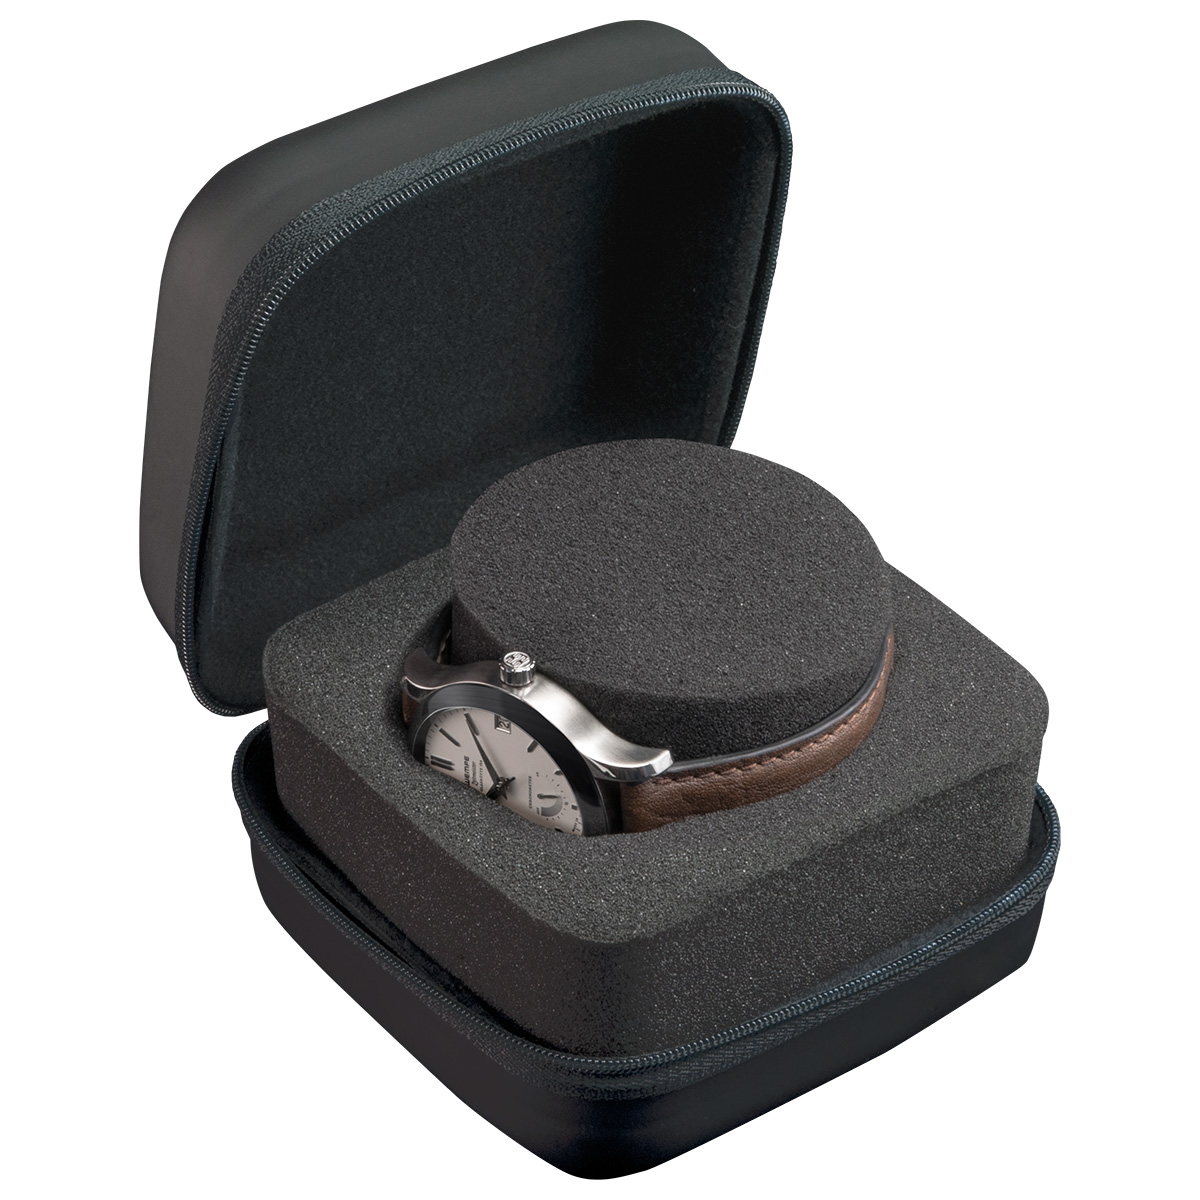 Watch Box ProtectMax, robust hard case for large watches, matt black synthetic material